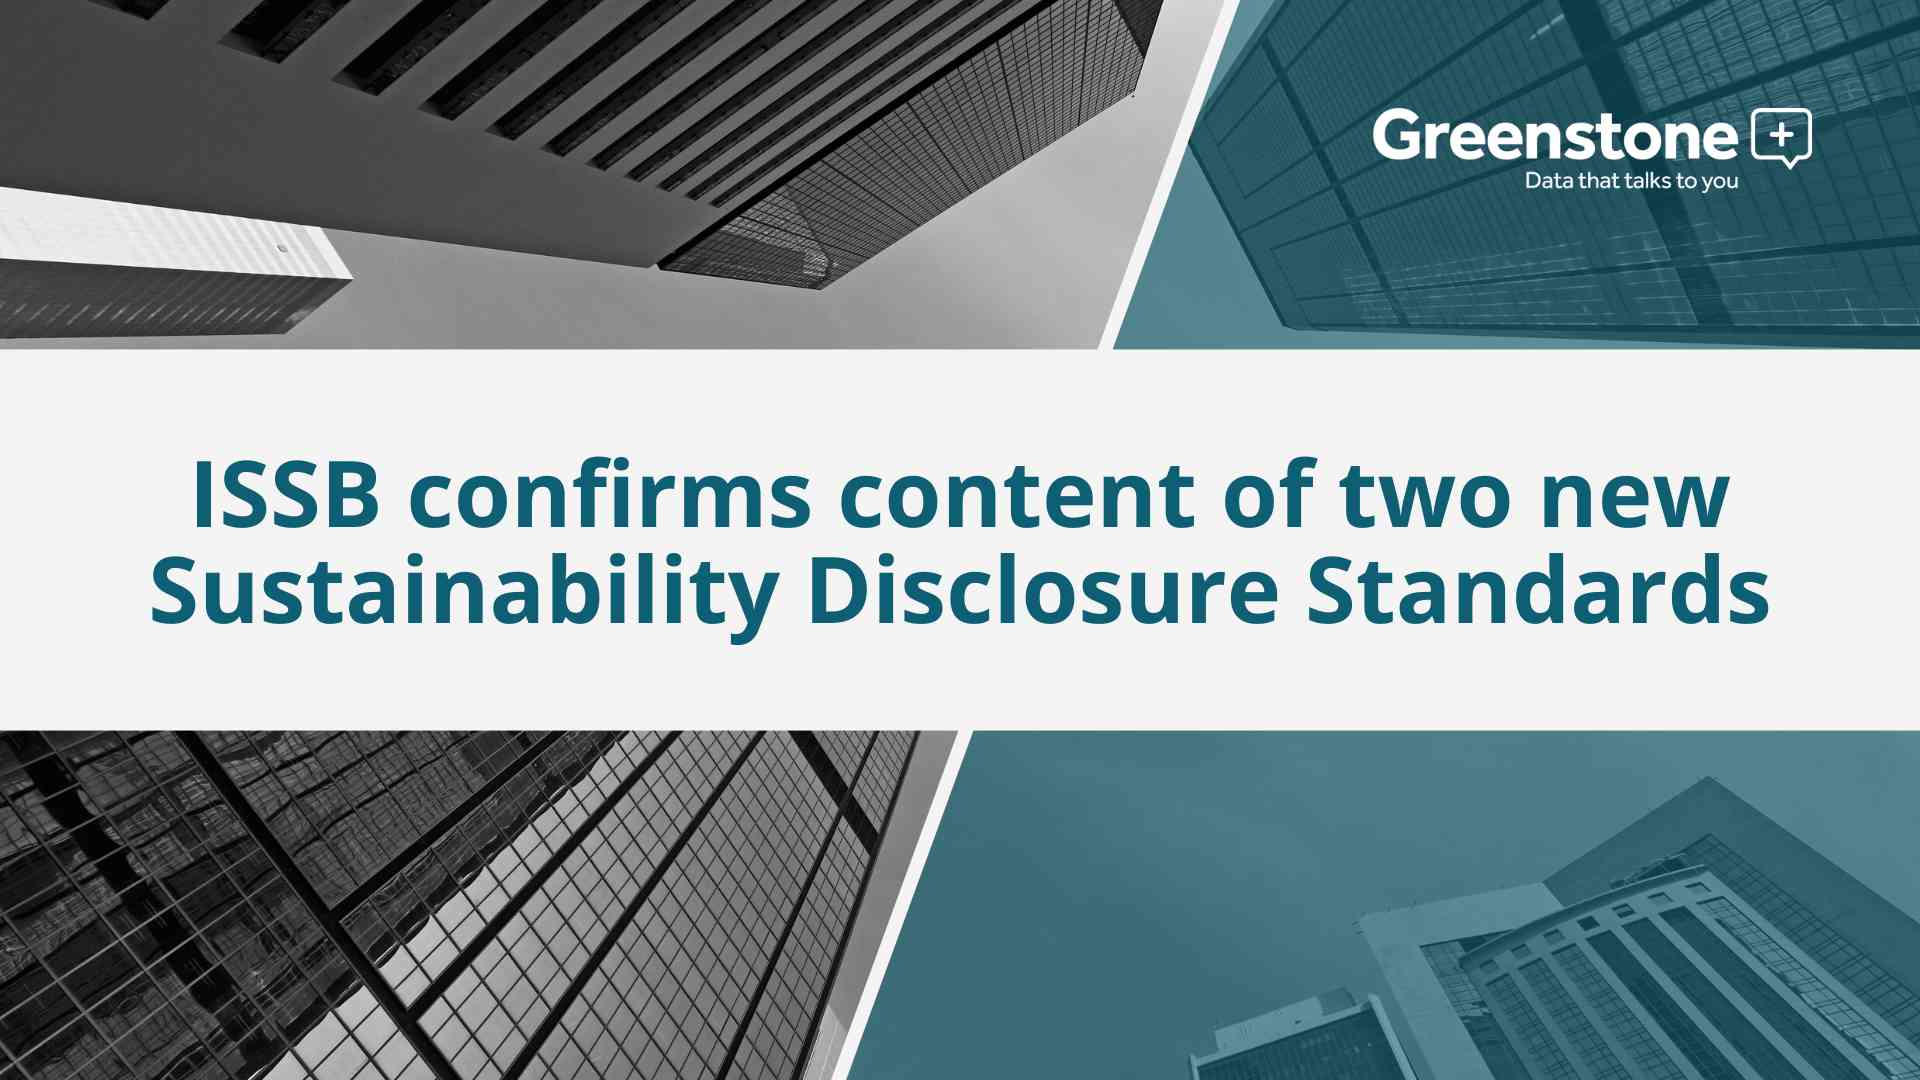 ISSB confirms content of two new Sustainability Disclosure Standards